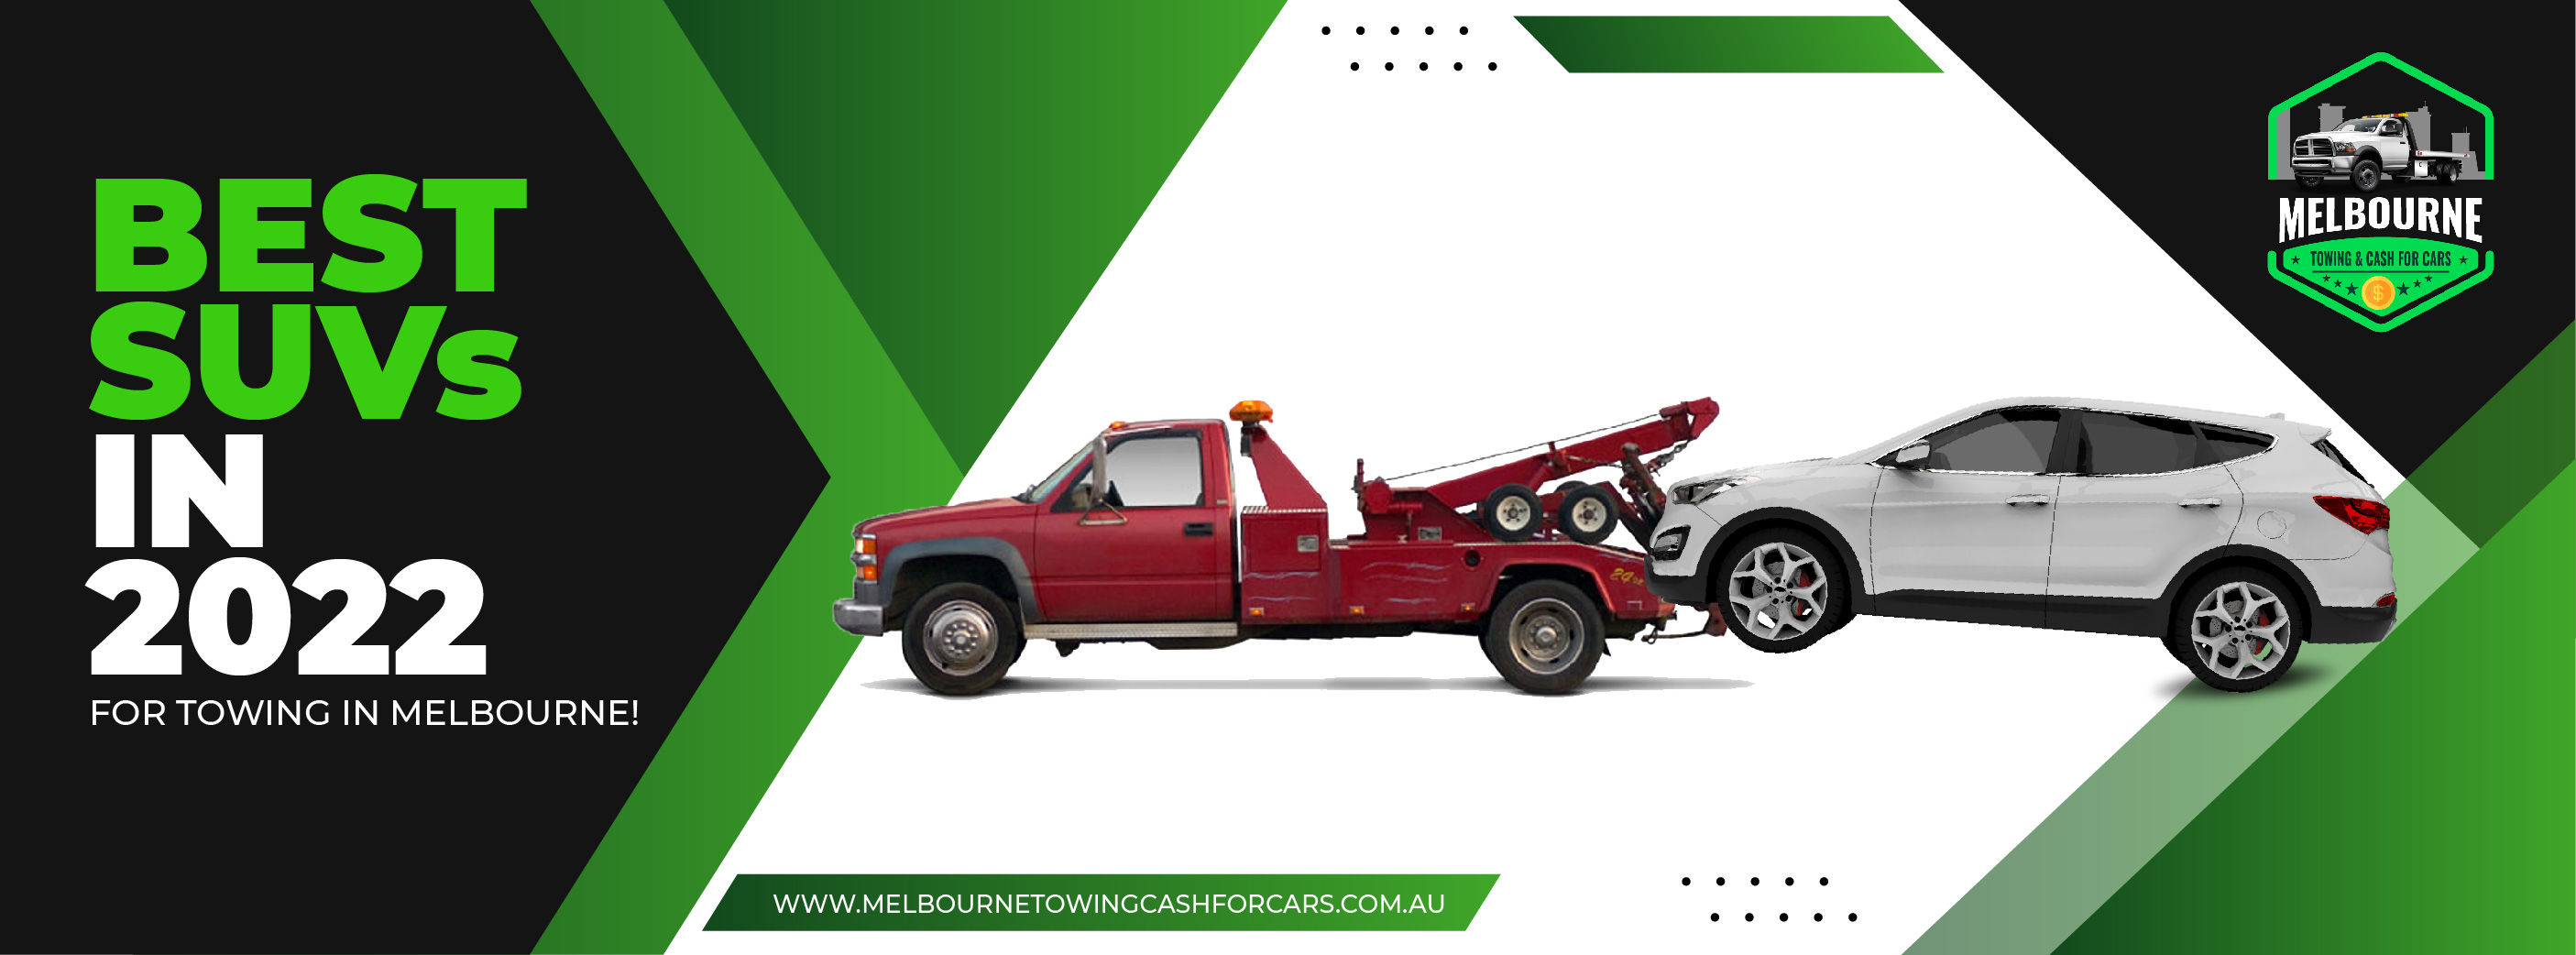 Best SUVs in 2022 for Towing in Melbourne